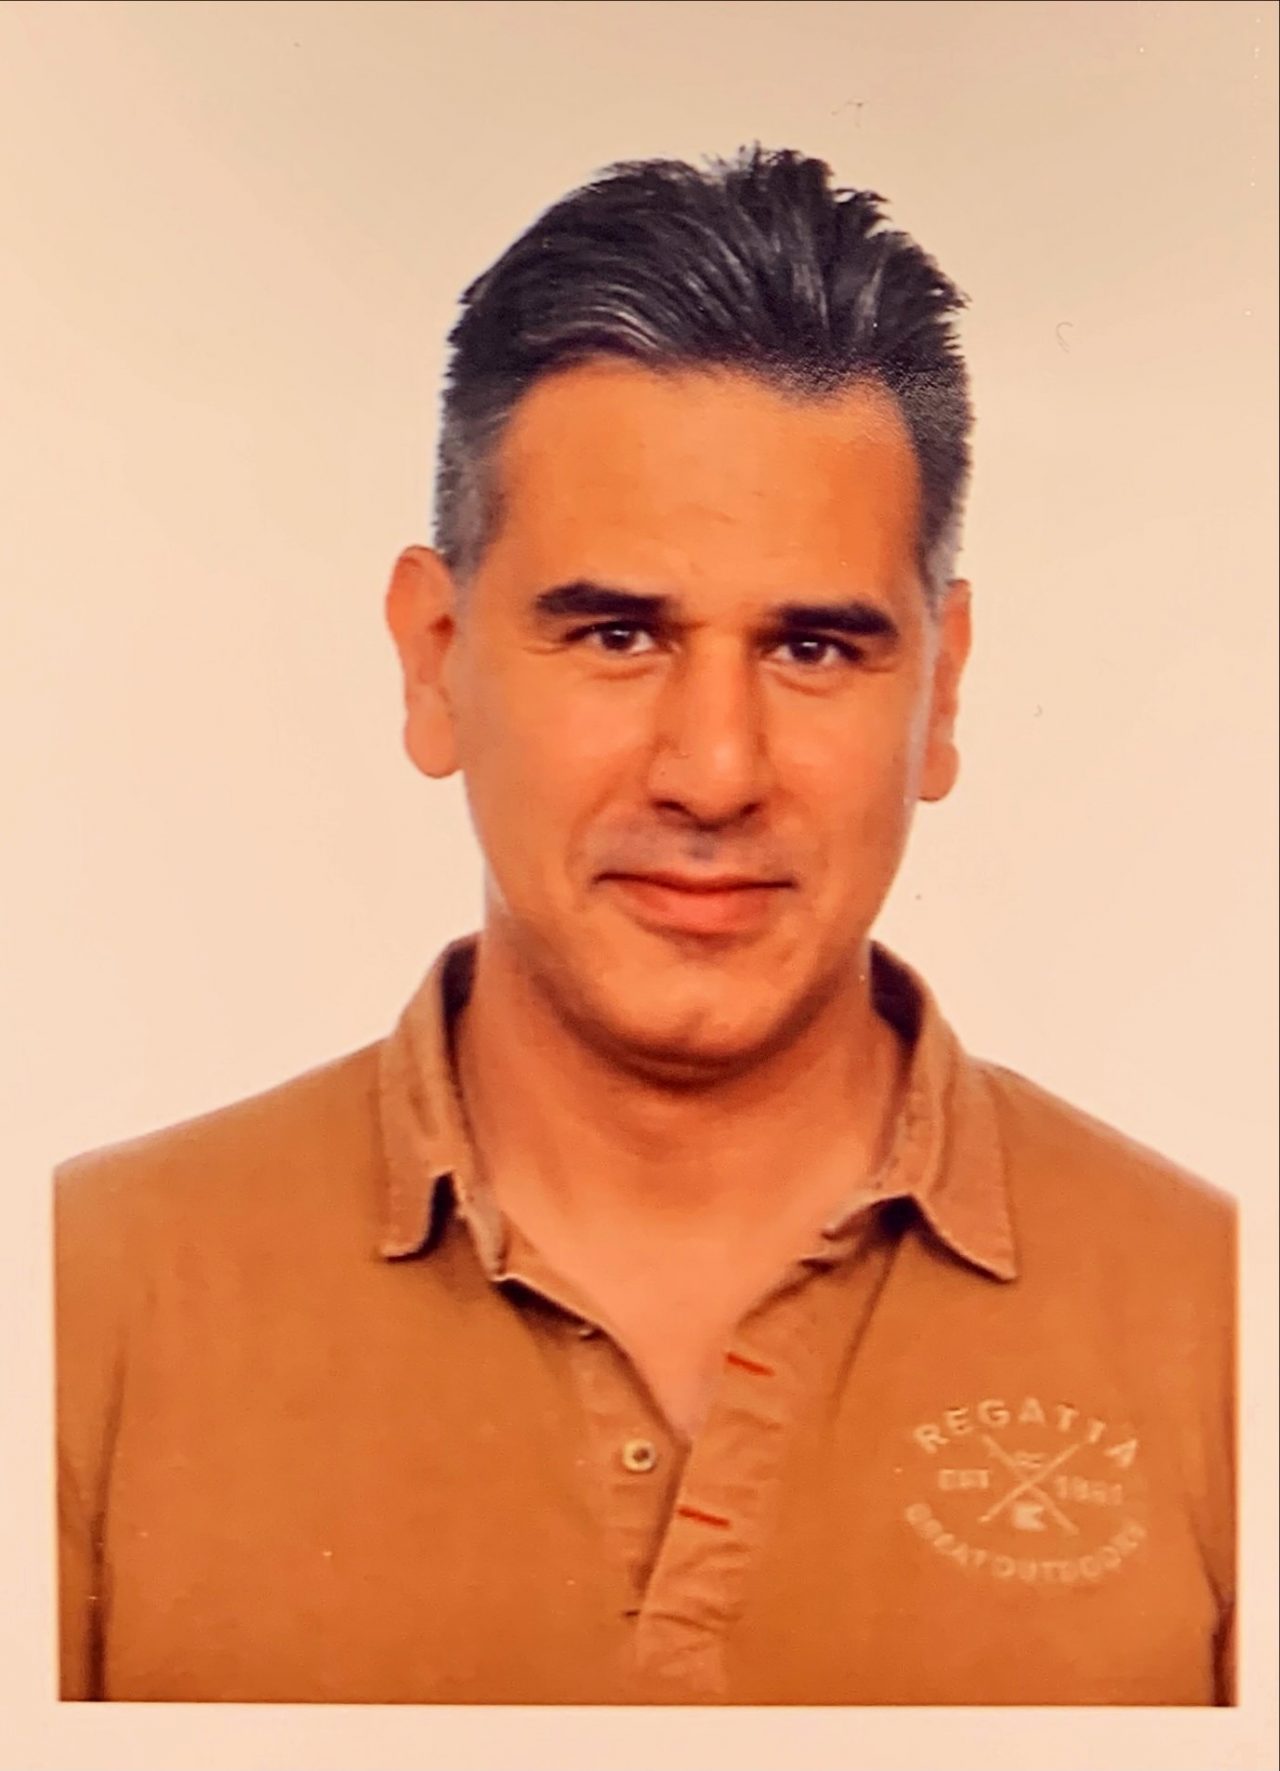 An image of Dr. Carlos Boucher